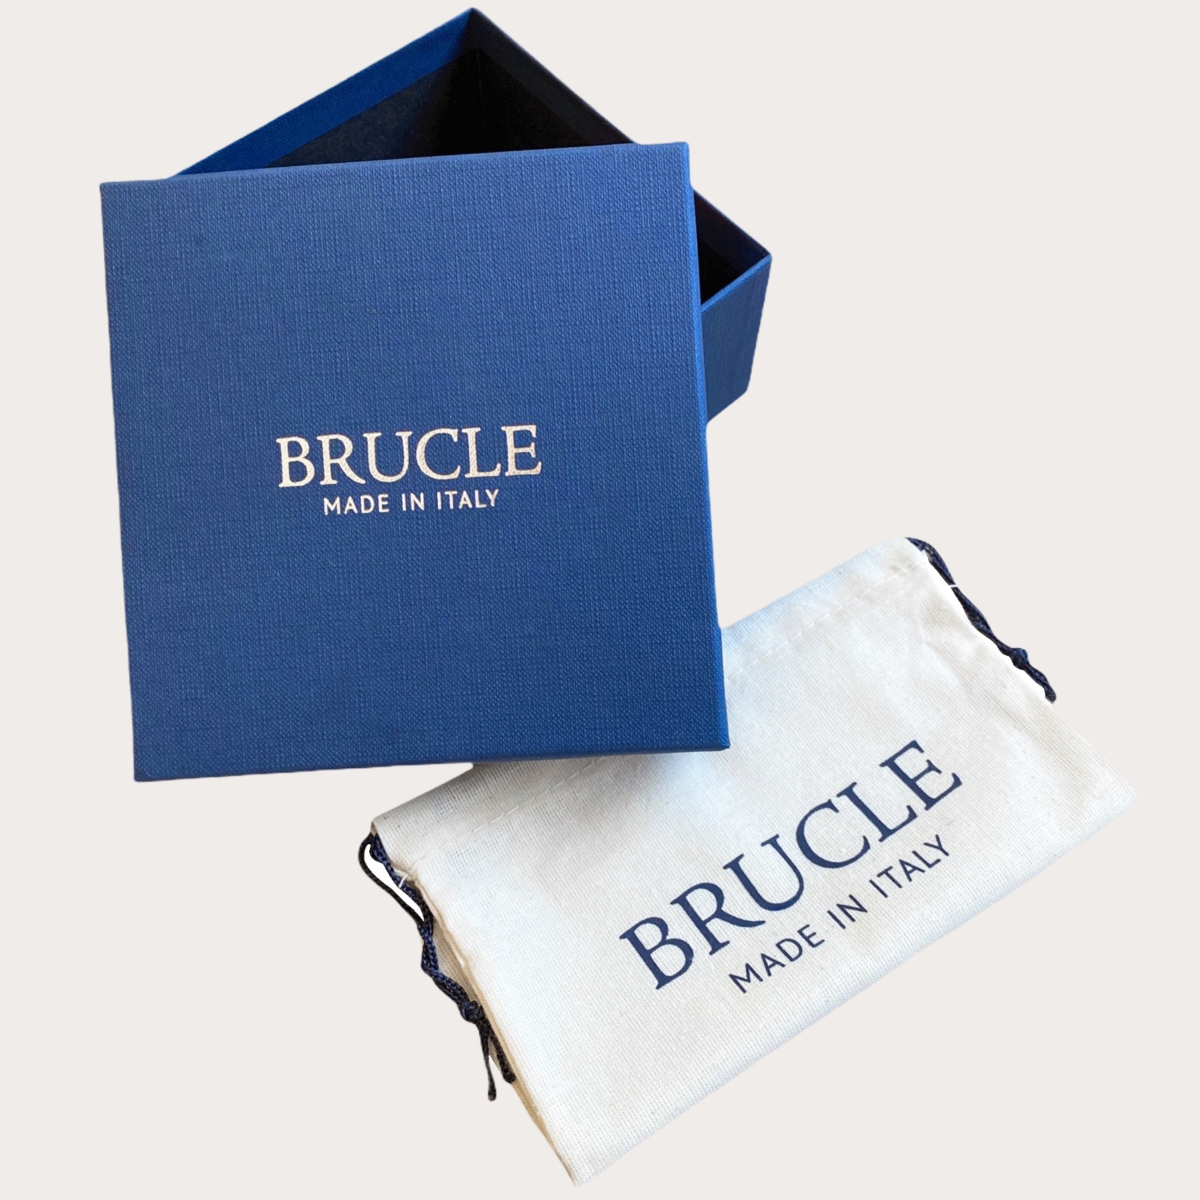 BRUCLE Exclusive blue alligator leather belt with covered buckle